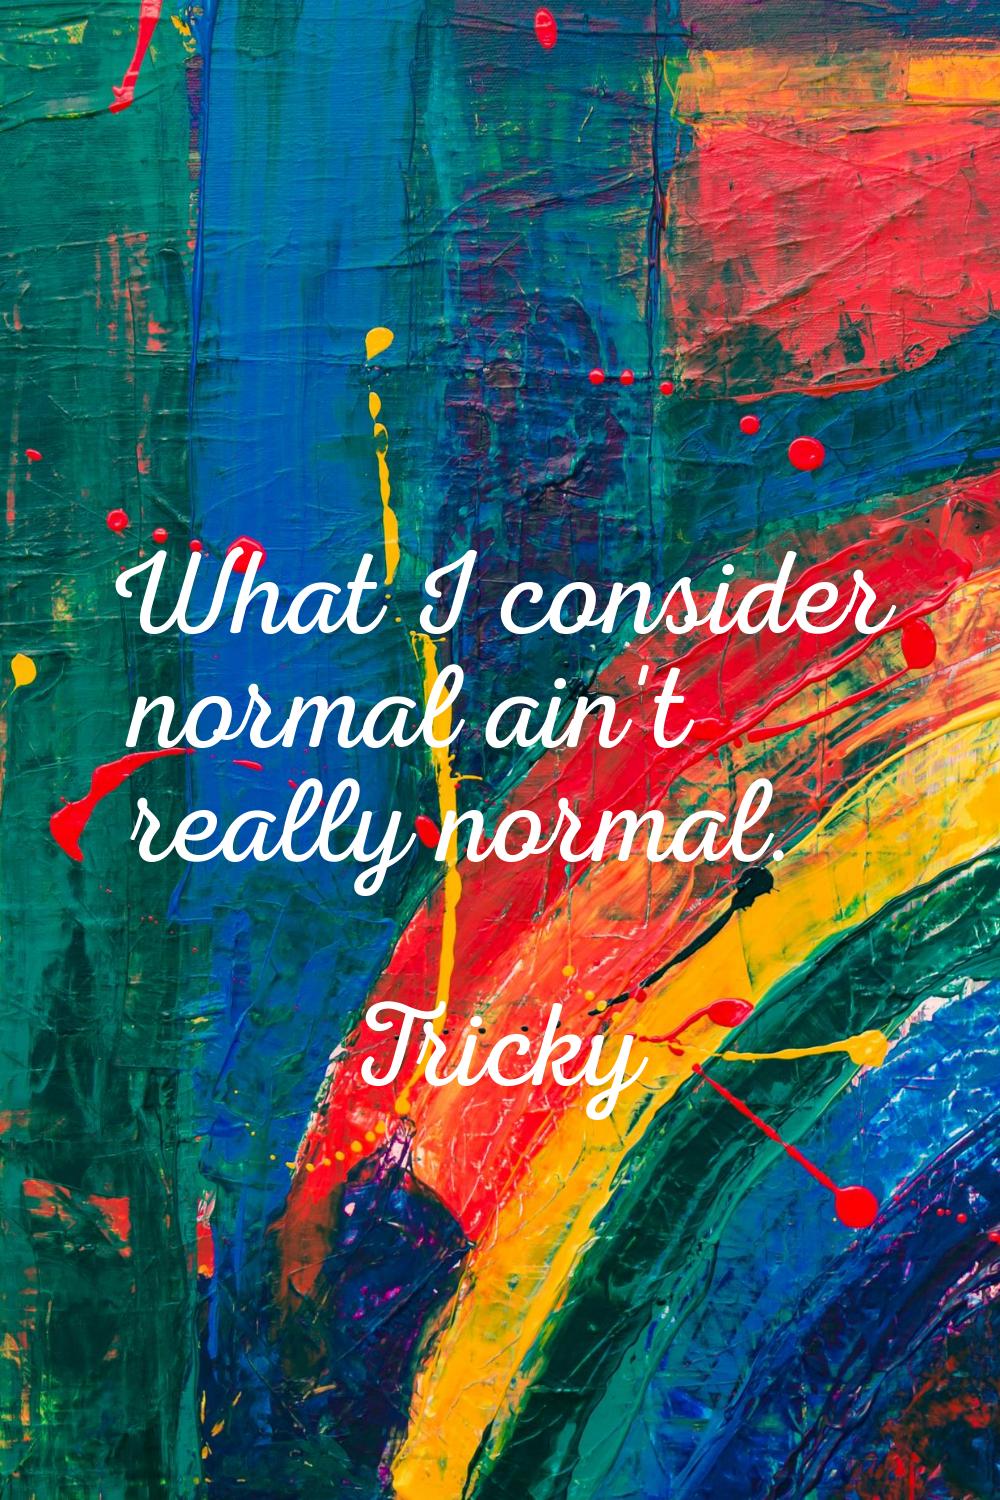 What I consider normal ain't really normal.